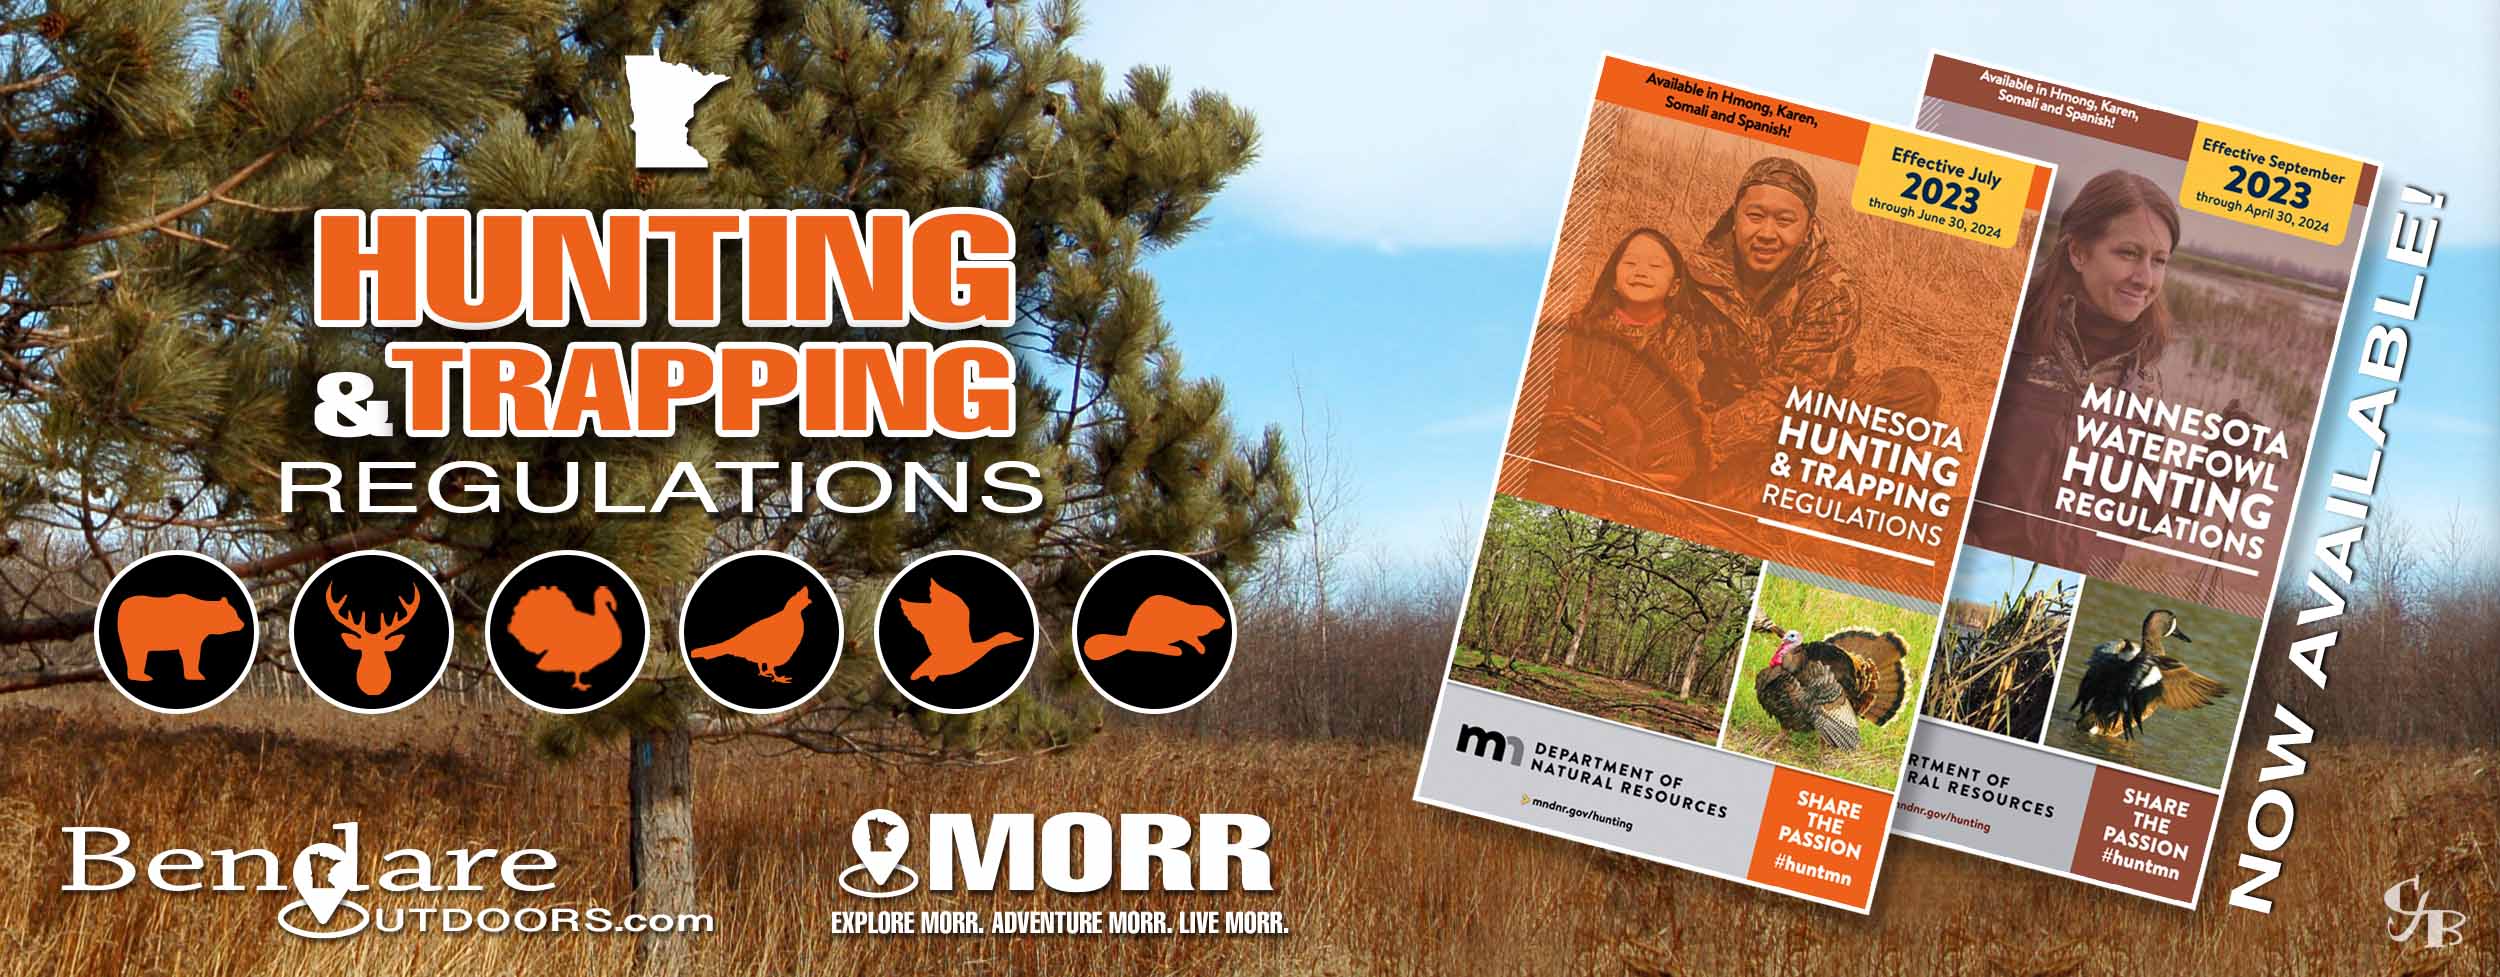 Minnesota Hunting and Trapping Regulations | Bendare Outdoors